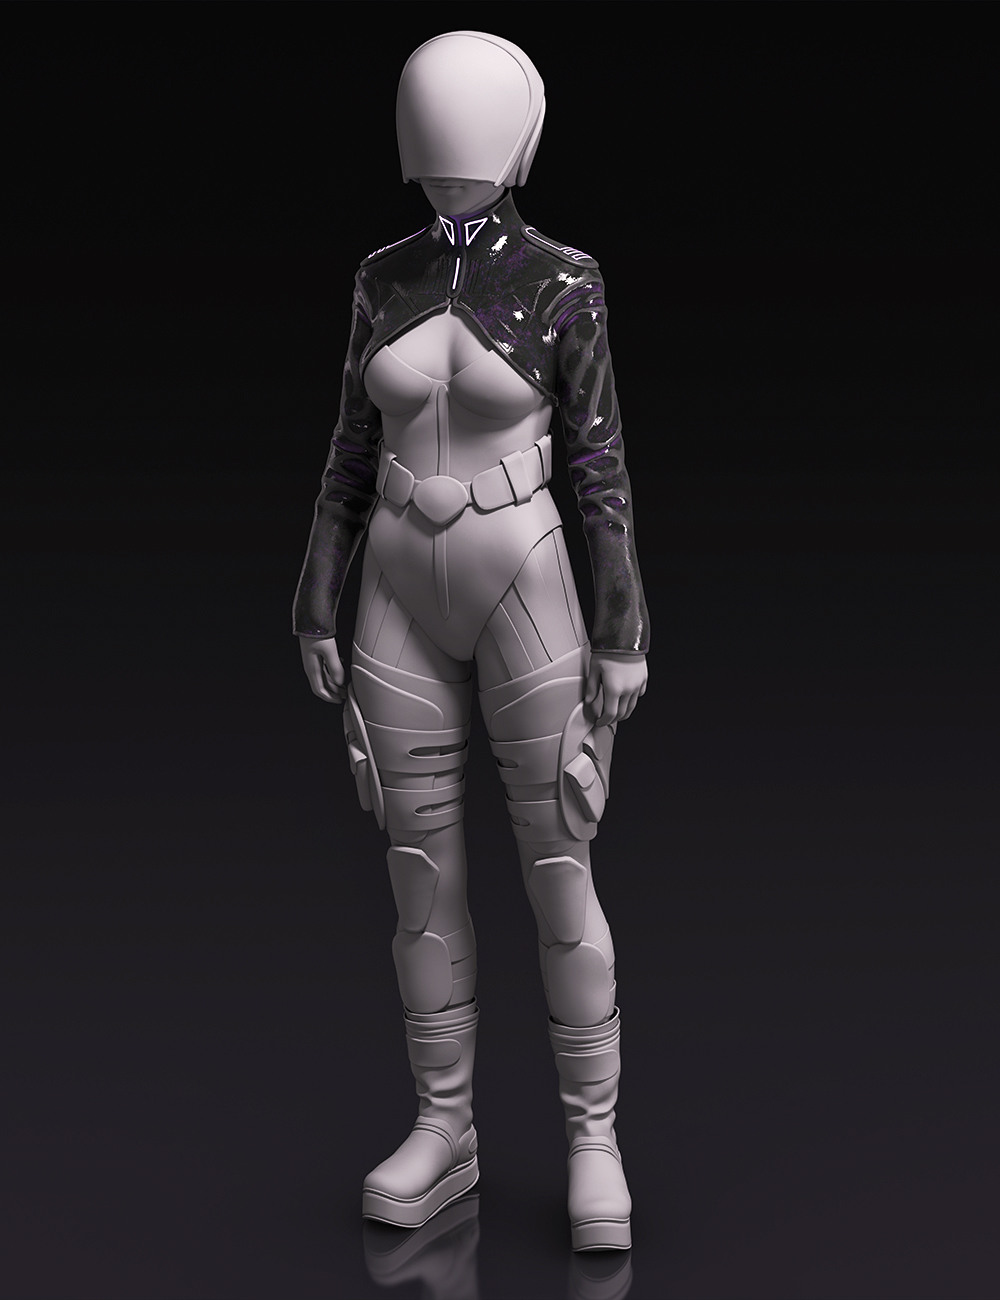 Sci-fi Rebel Rider Outfit Jacket for Genesis 8.1 Female by: Yura, 3D Models by Daz 3D